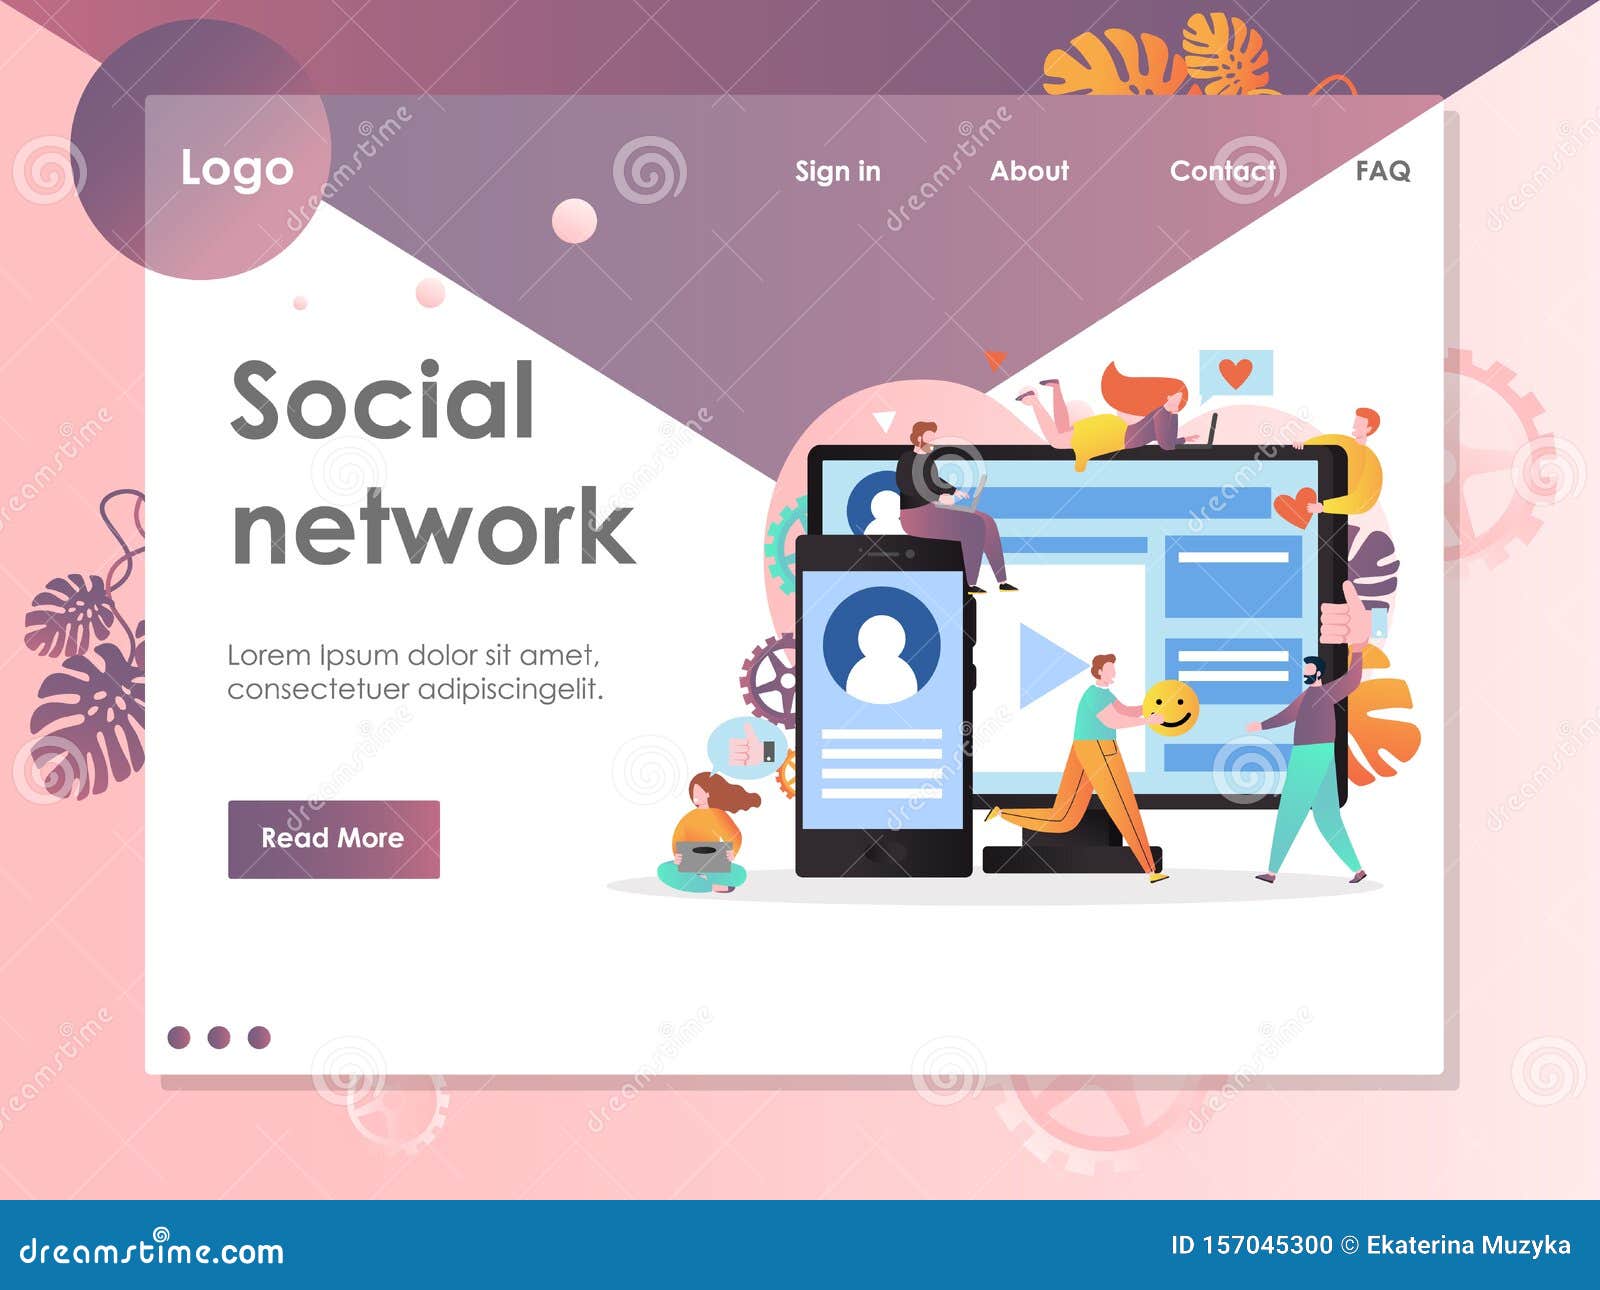 Social Network Website Template from thumbs.dreamstime.com